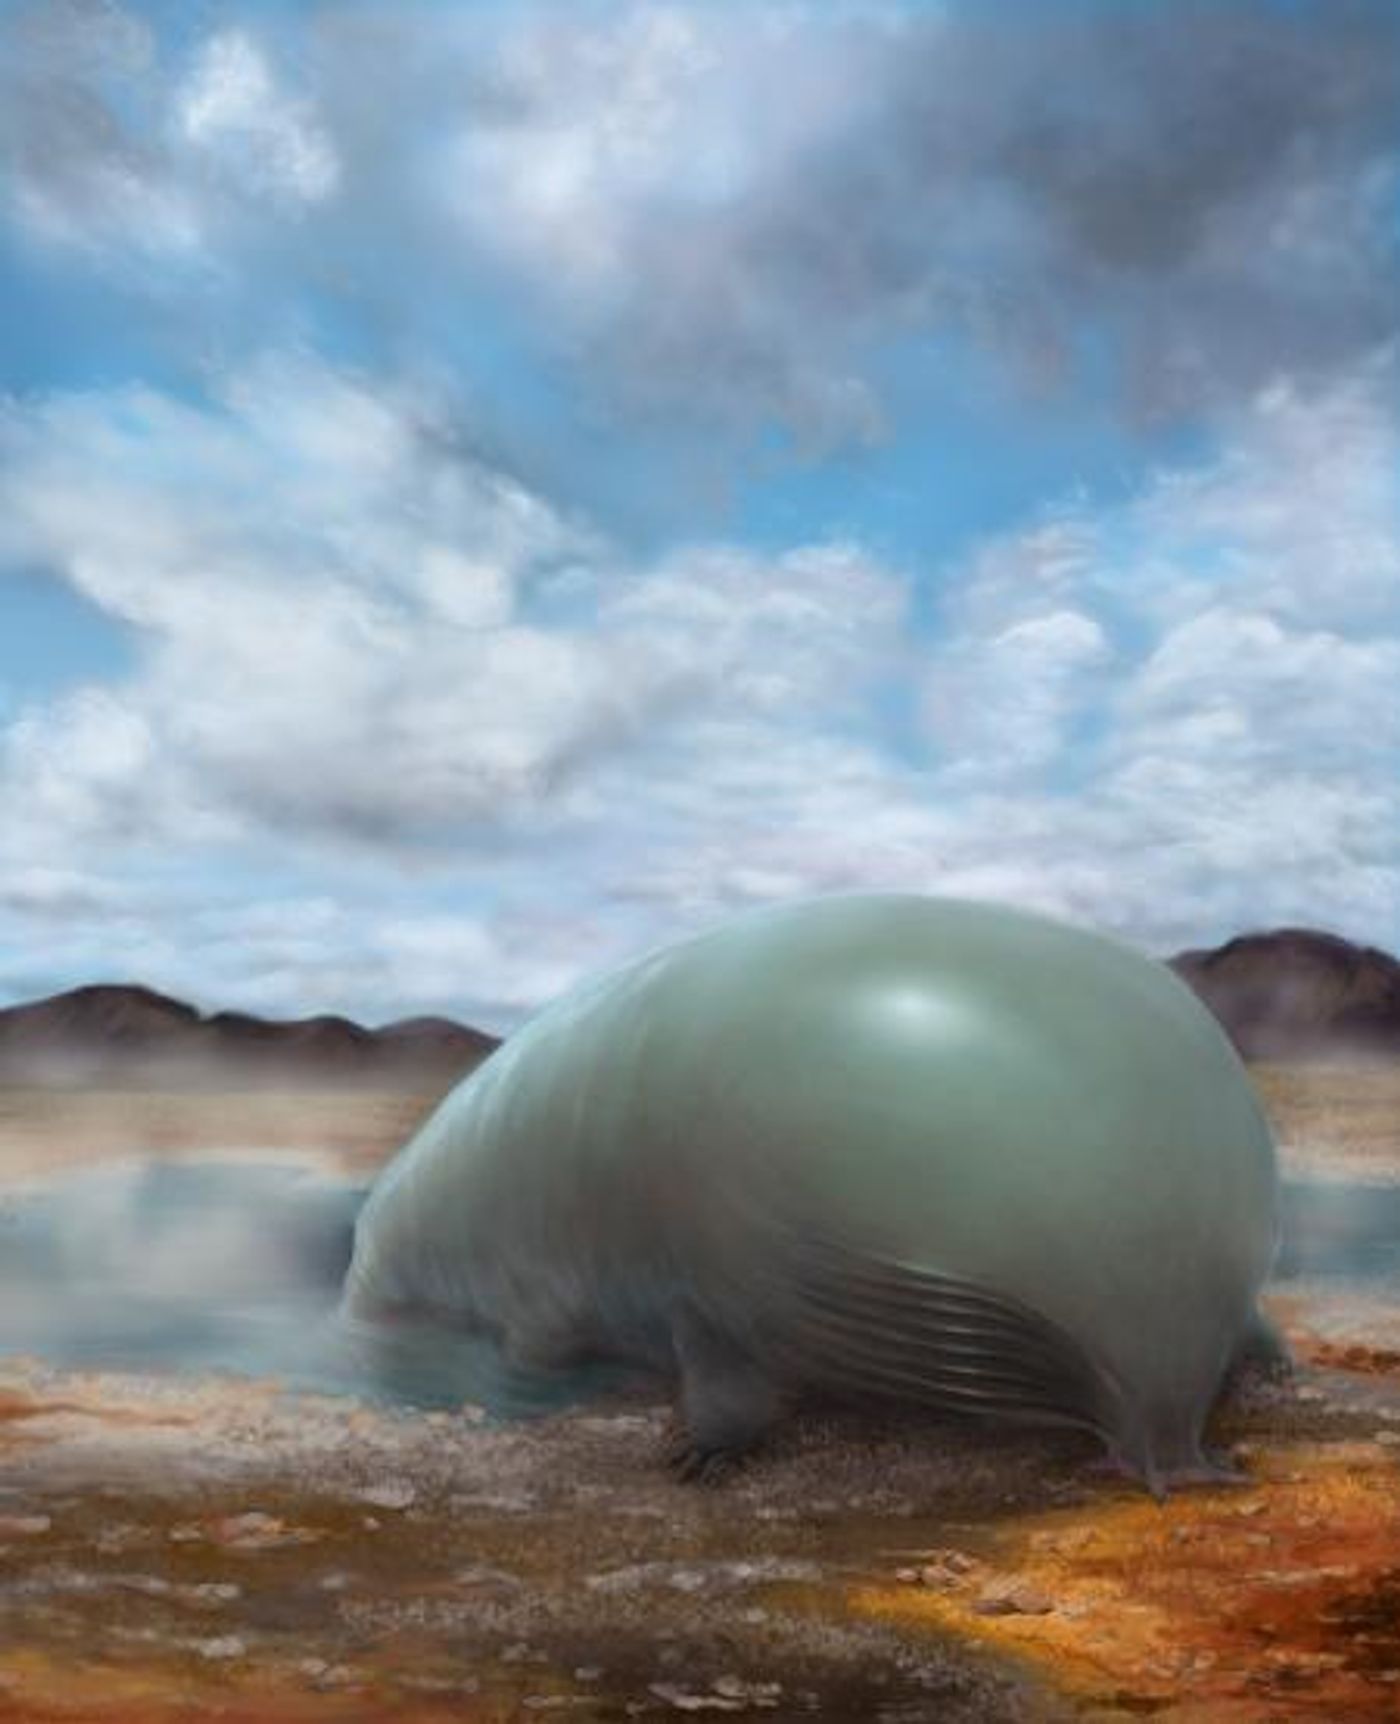 Artist rendering of organosilicon-based life. Research shows for the first time, that bacteria can create organosilicon compounds. This does not prove that silicon- or organosilicon-based life is possible, but shows that life could be persuaded to incorporate silicon into its basic components./Credit: Lei Chen and Yan Liang (BeautyOfScience.com) for Caltech